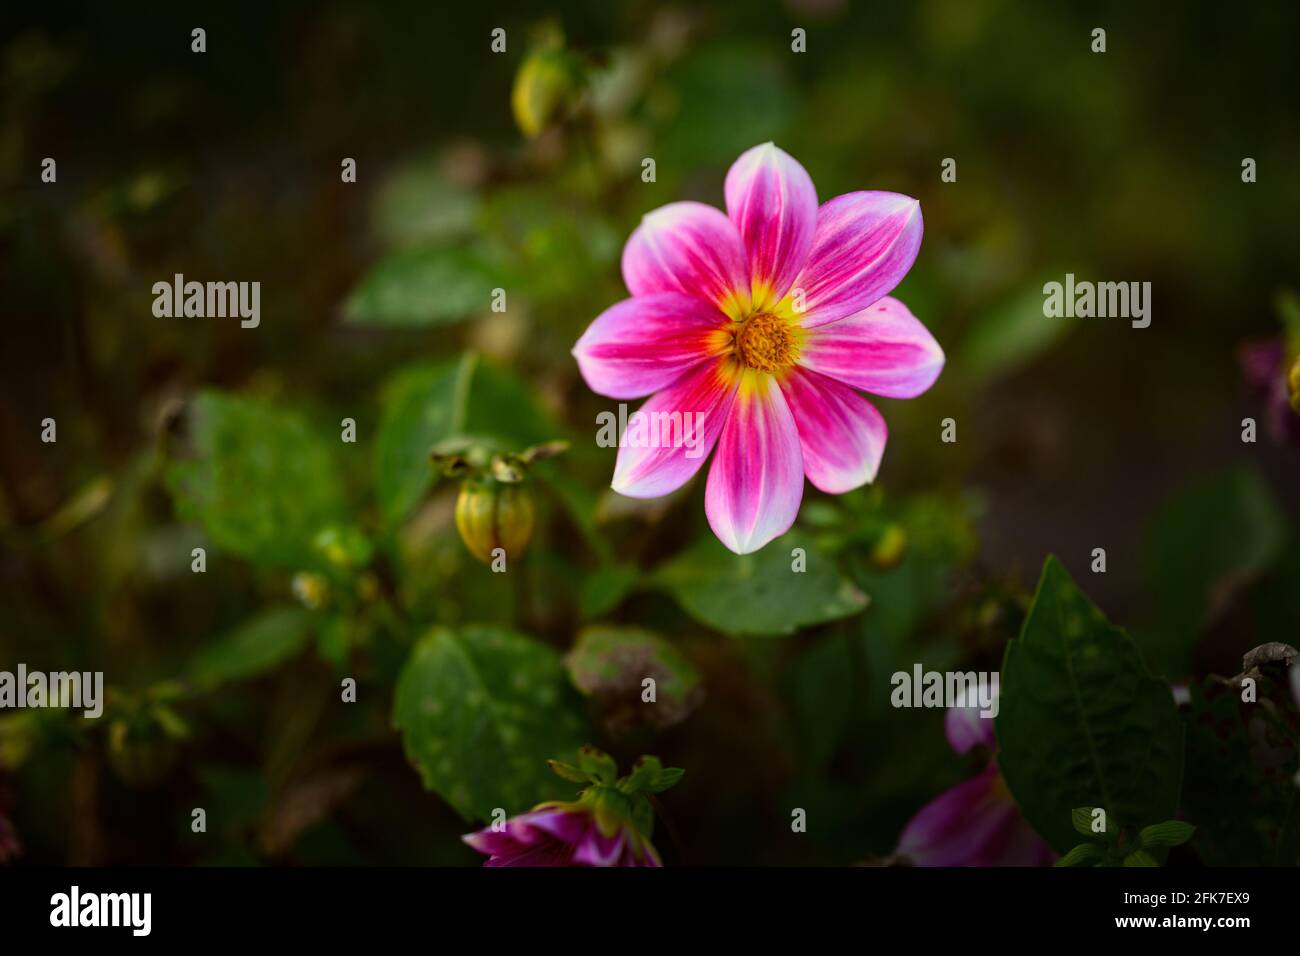 Flower of Dahlia. Selective focus with shallow depth of field. Stock Photo